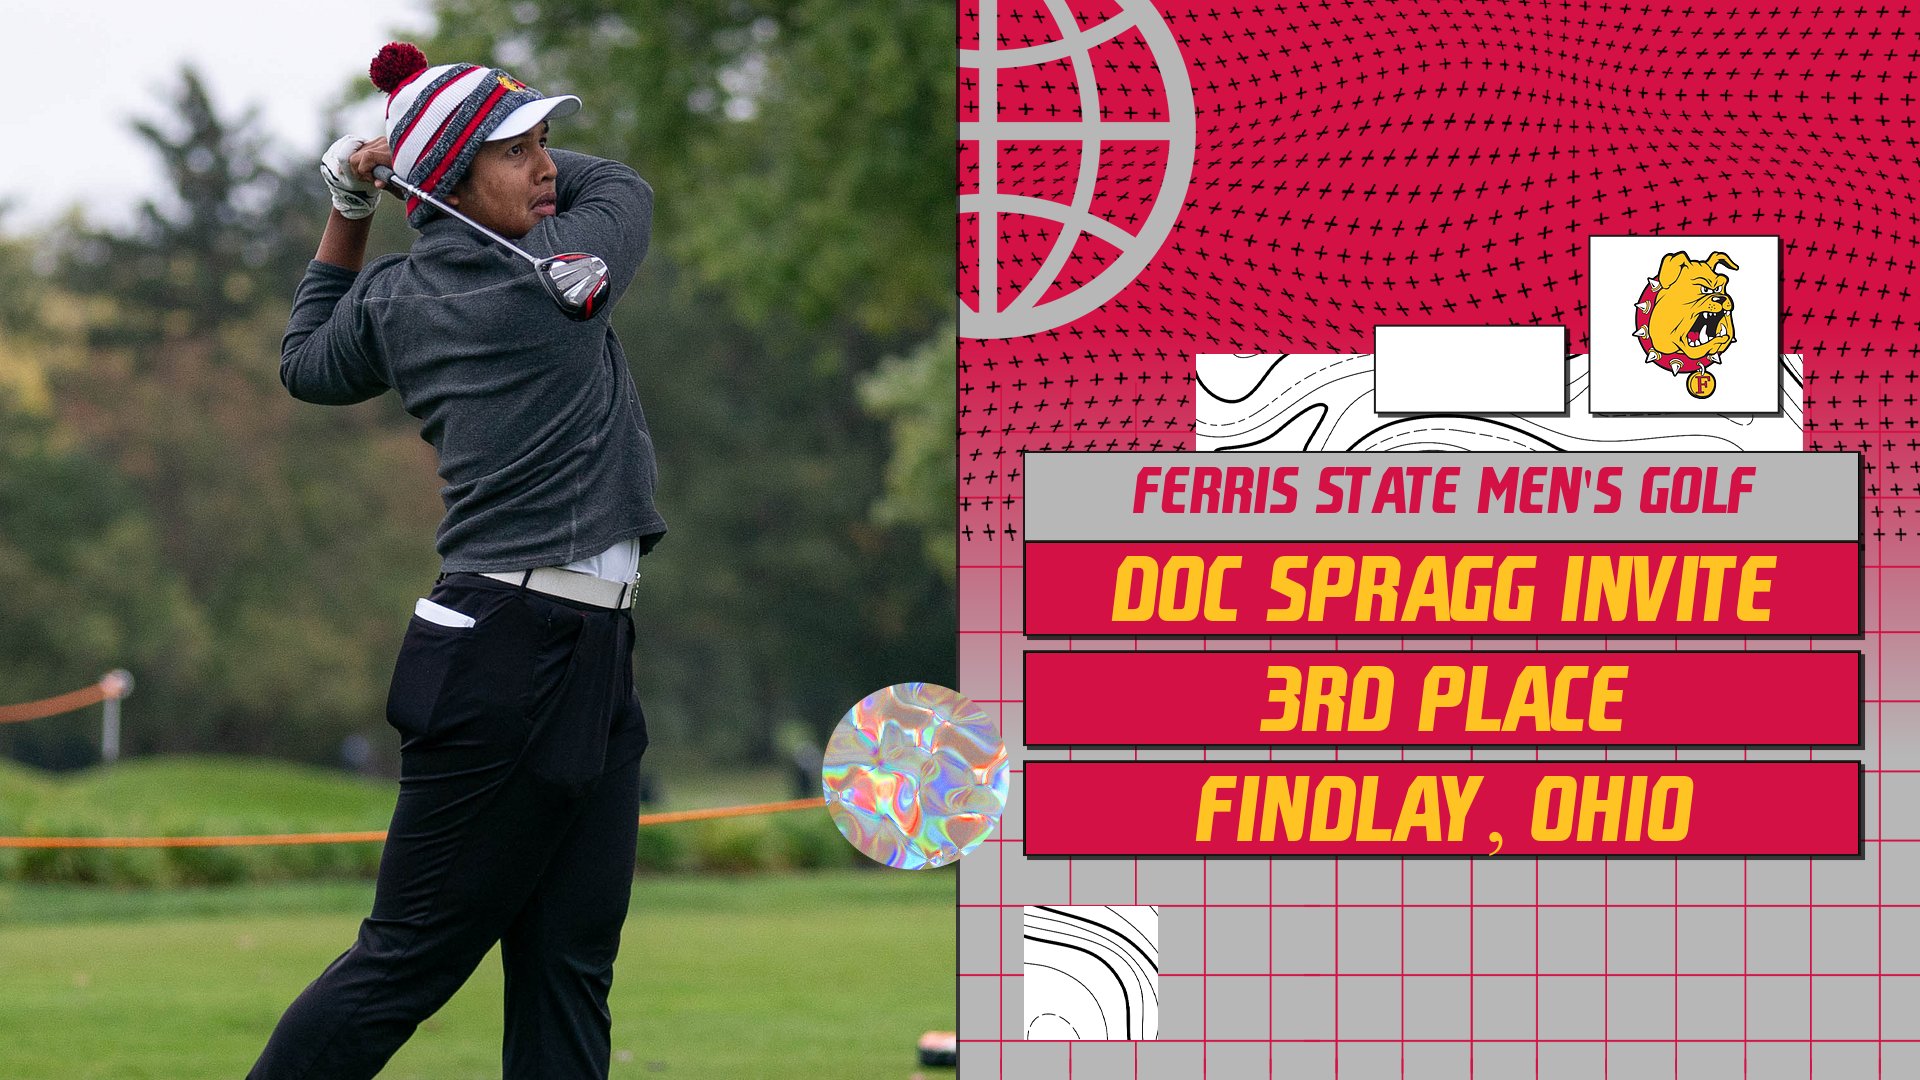 Ferris State Men's Golf Finishes Fall Season Strong With Third-Place Team Effort